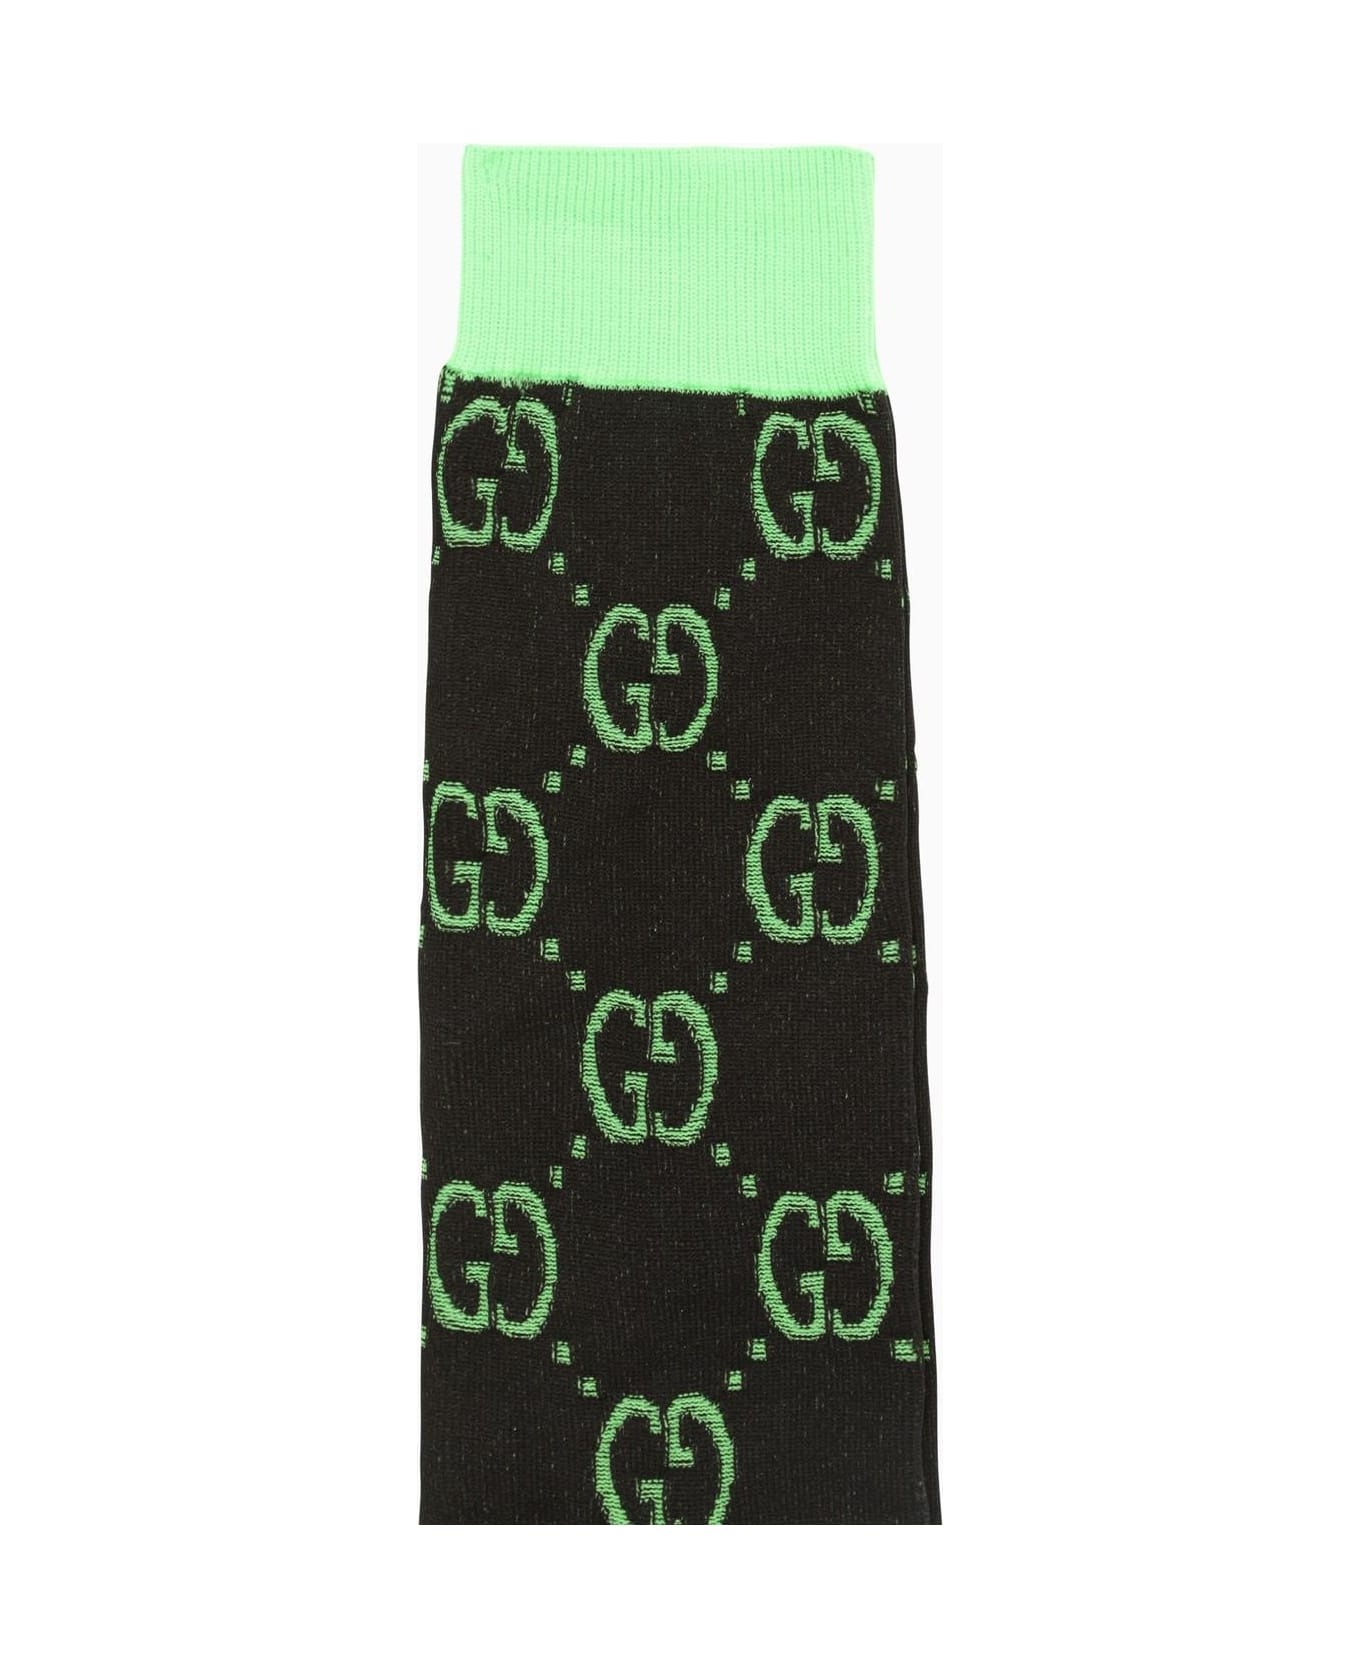 Black And Green Socks With Gg Motif - 2